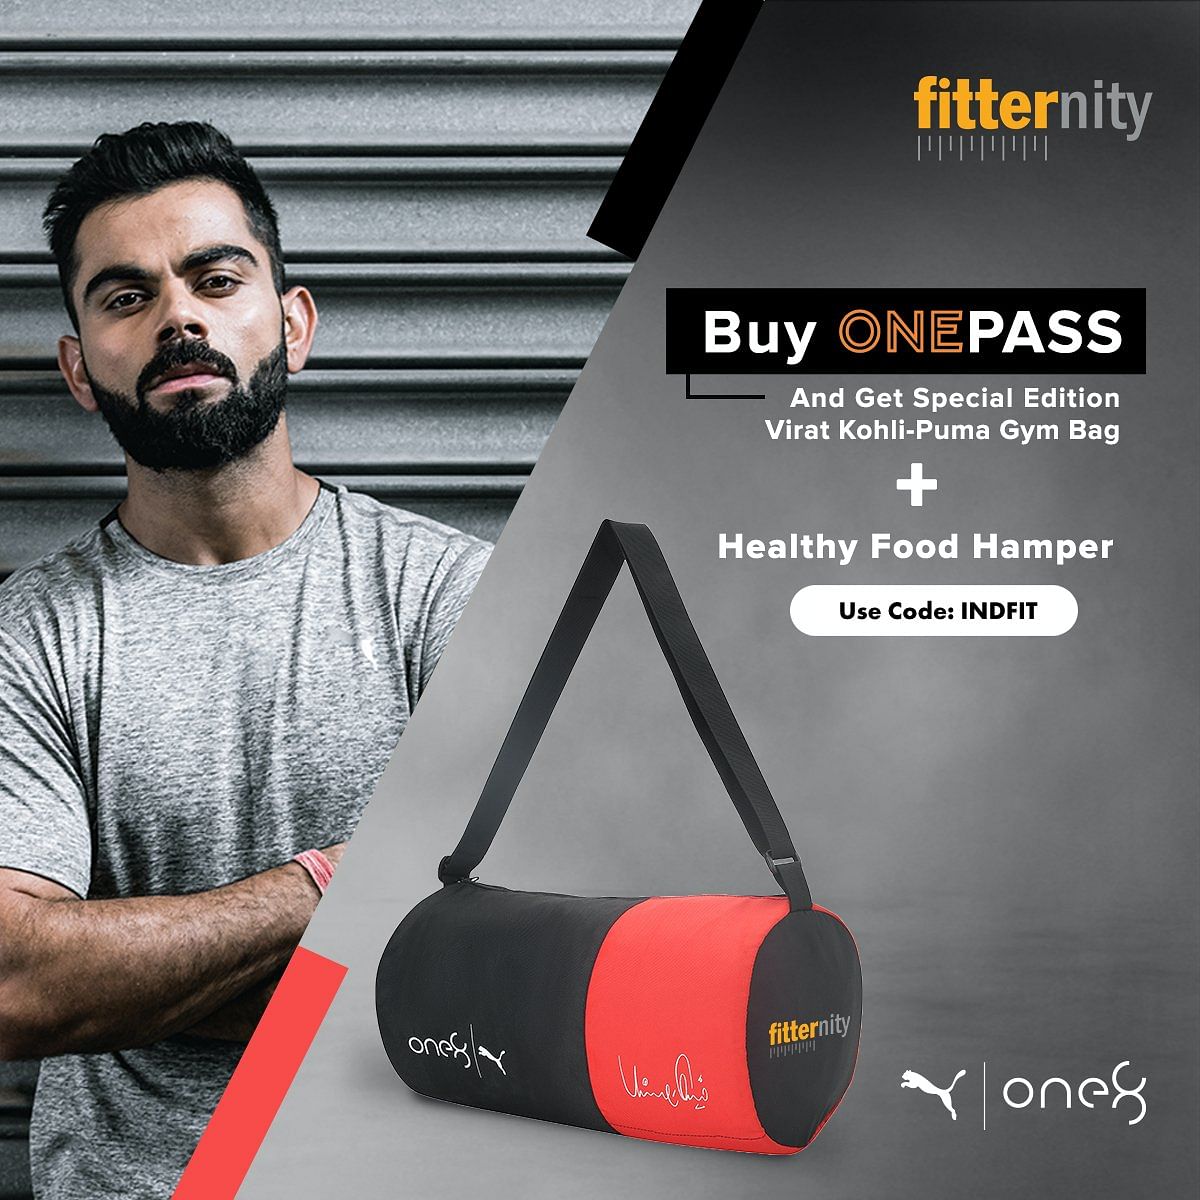 A fitternity ad spotted on Facebook
